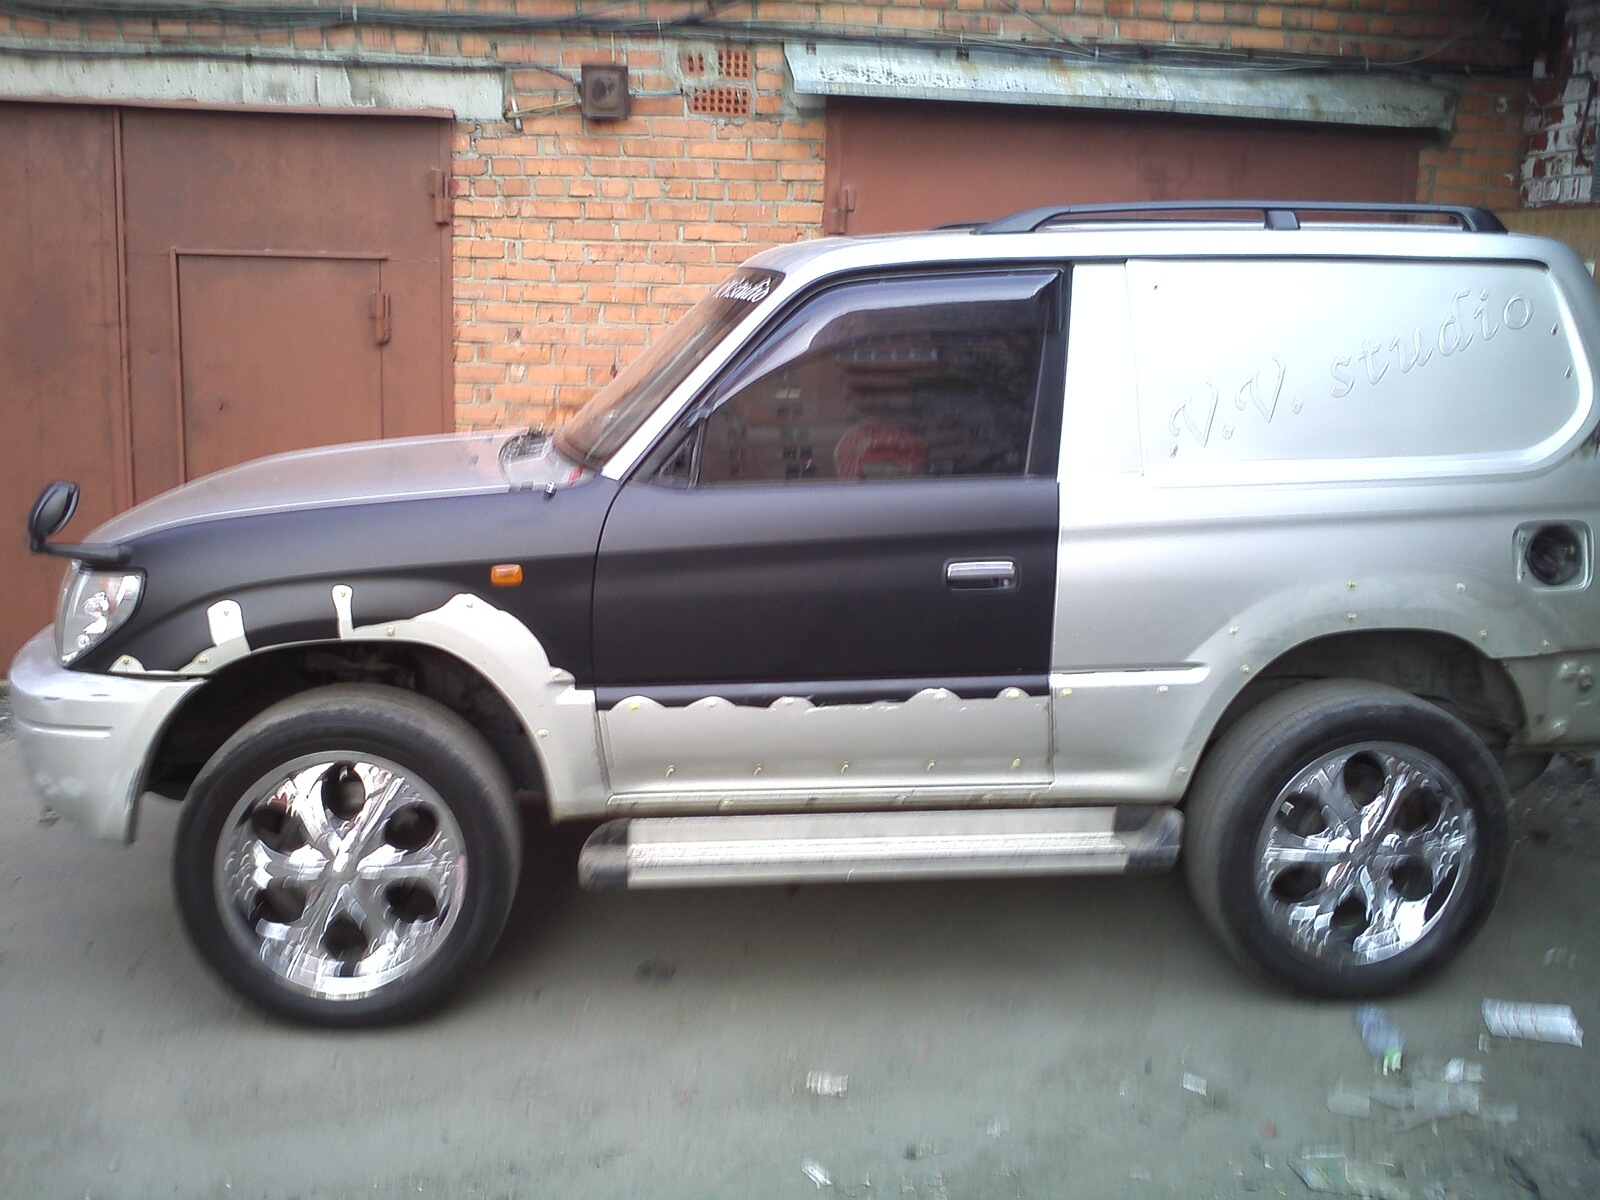 A little new wrapped with a film etc - Toyota Land Cruiser Prado 27 L 2000